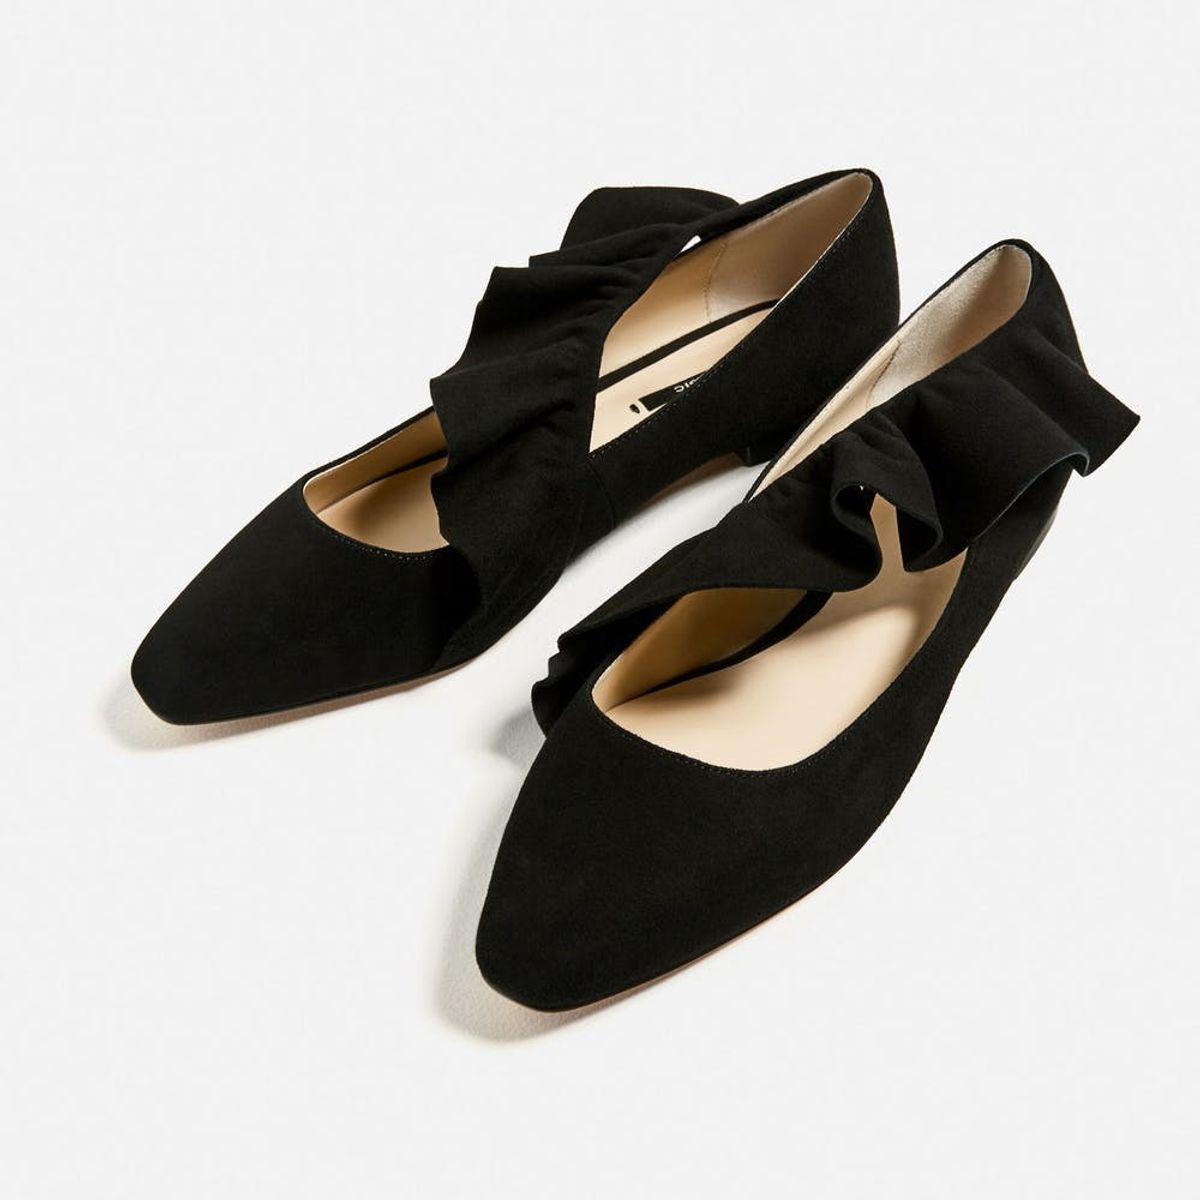 10 Party-Perfect Flats That Will Make You Forget You Ever Wore Heels